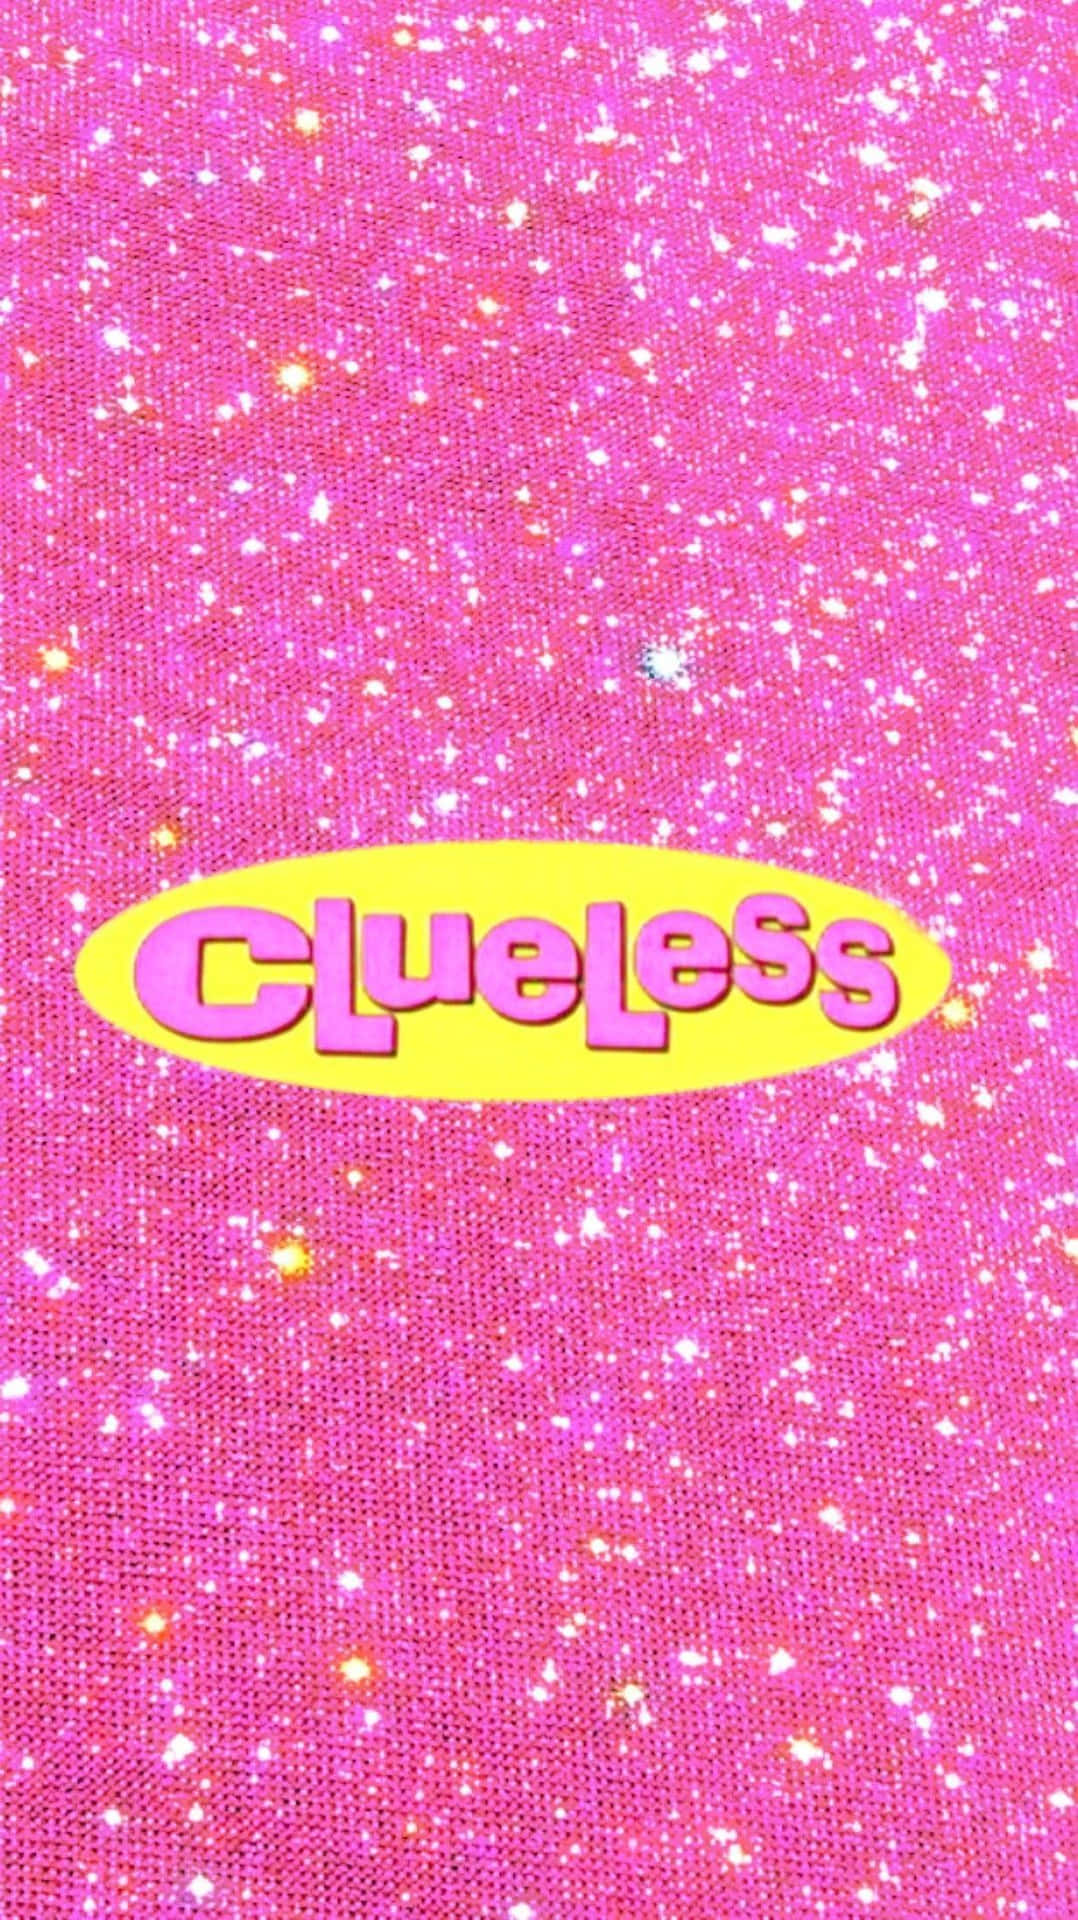 A Pink Glittery Fabric With The Word Clueless On It Wallpaper